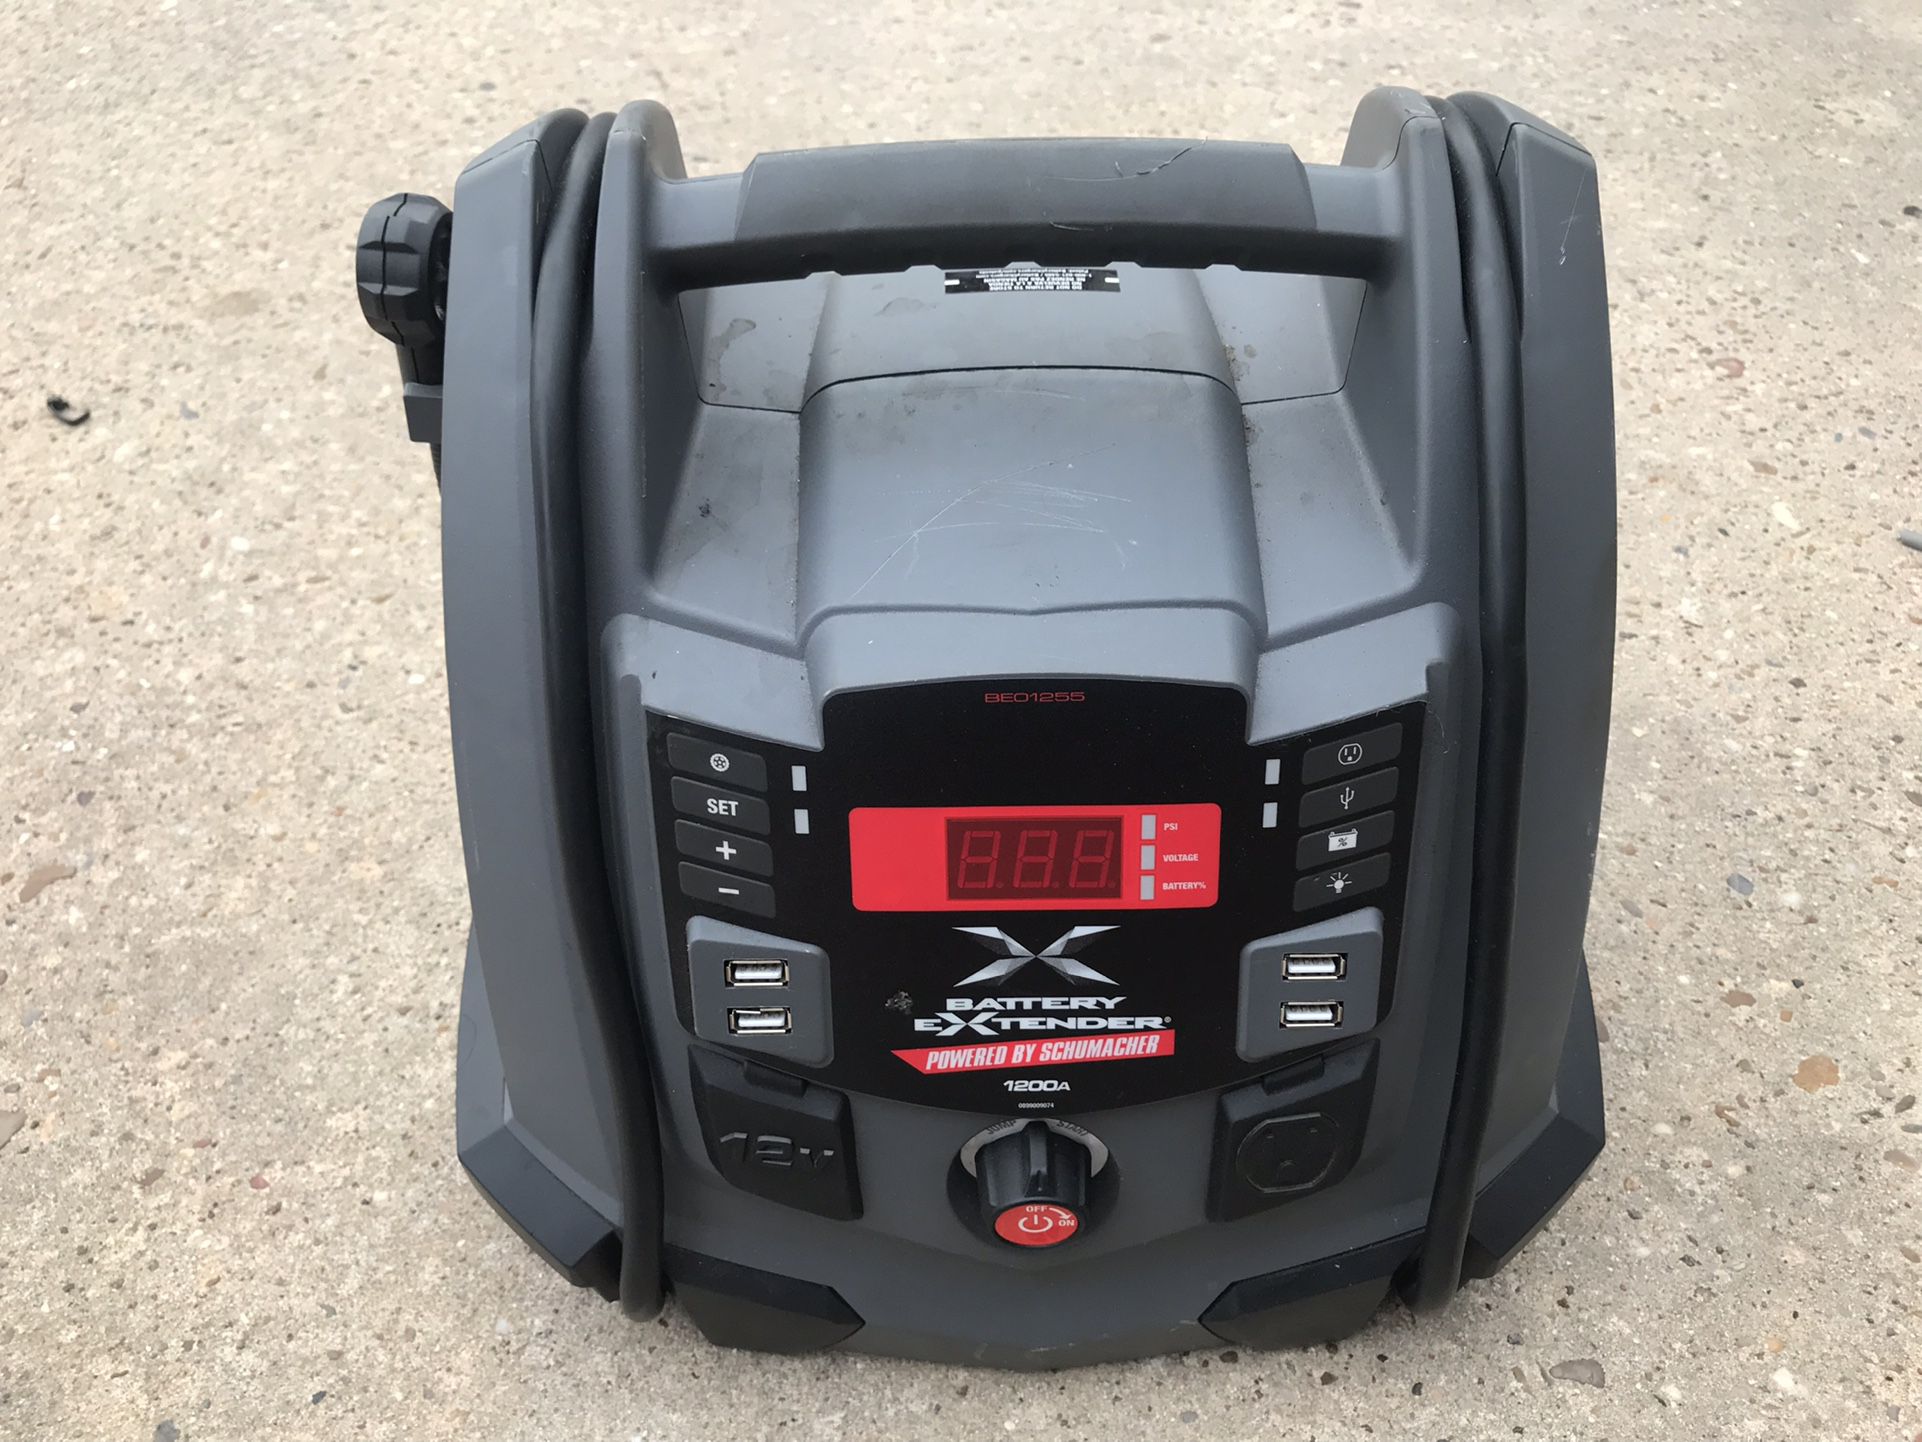 Avapow 6000A Car Battery Jump Starter for Sale in Houston, TX - OfferUp